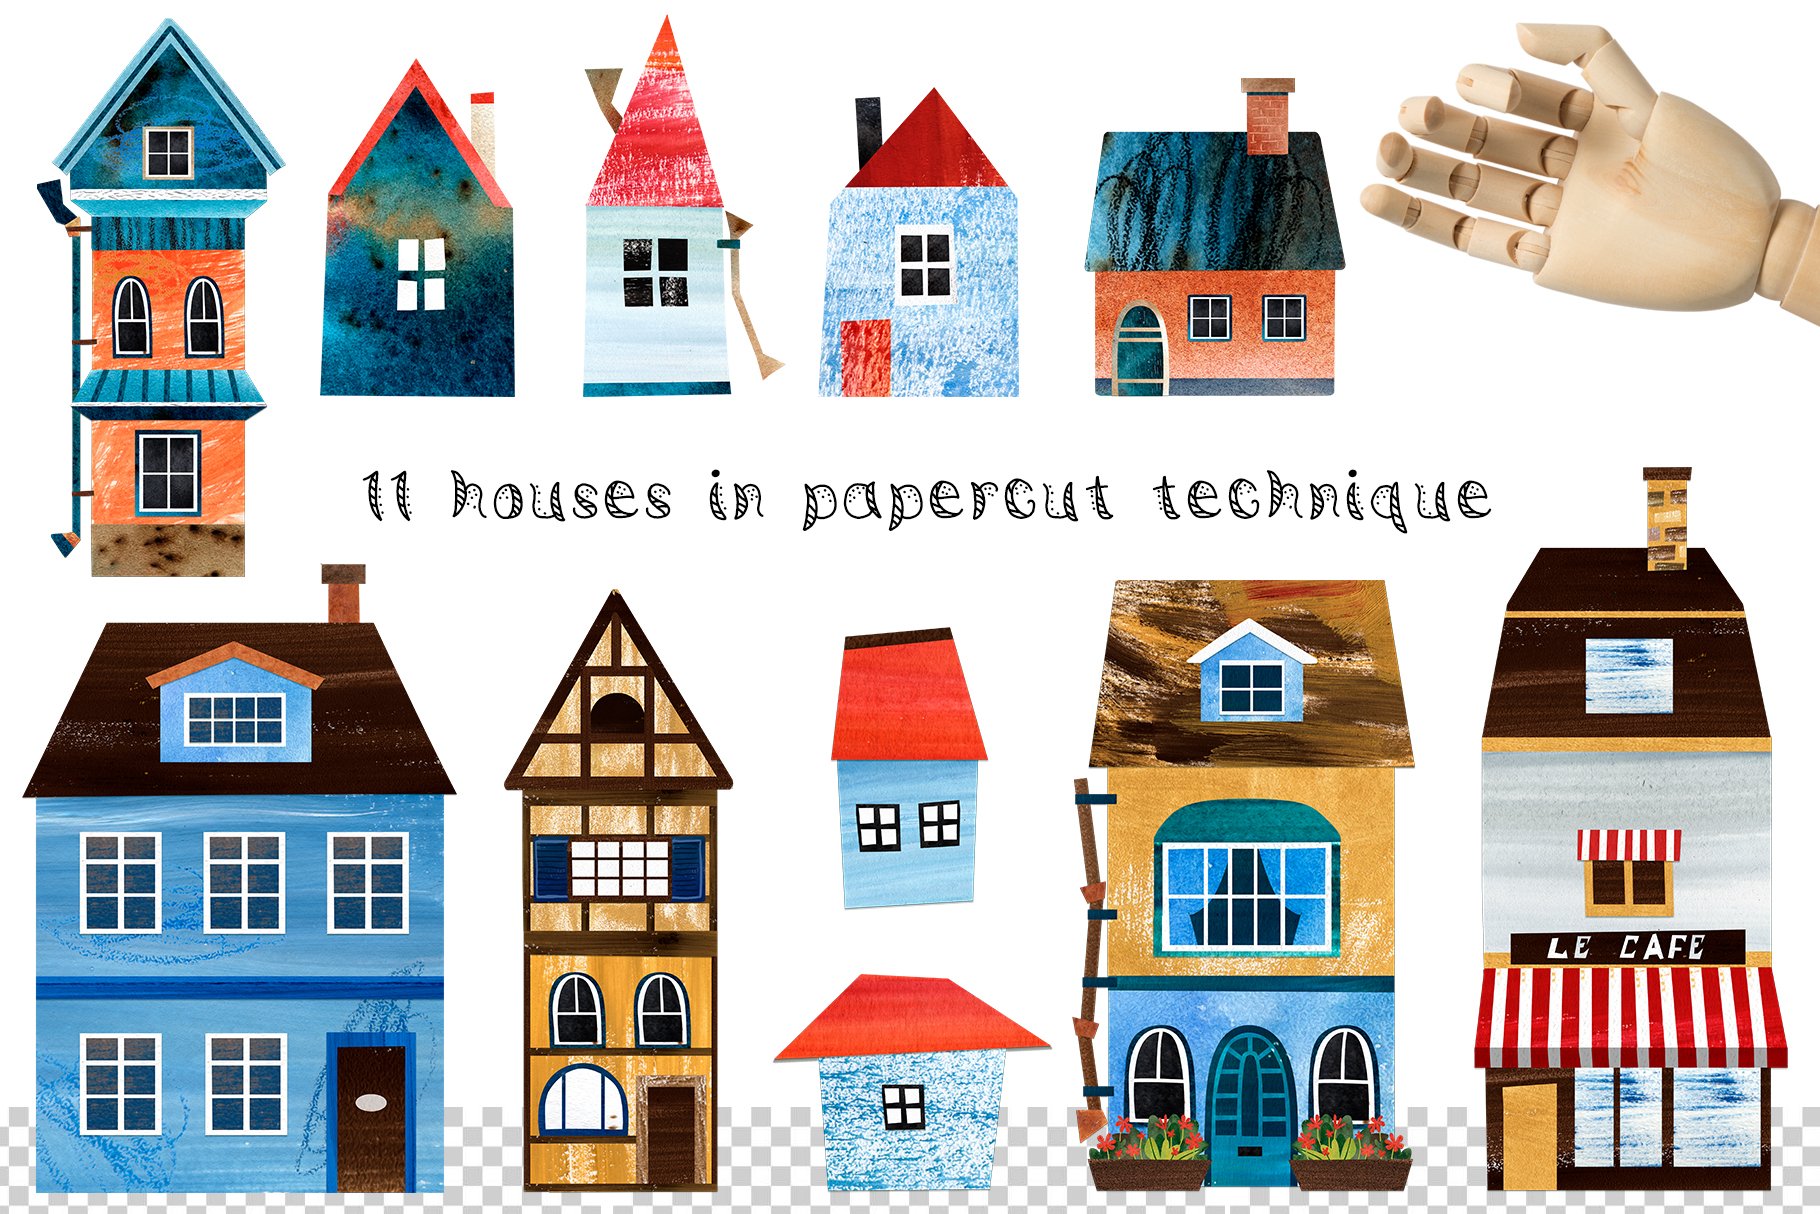 There are 11 houses in paper cut technique.